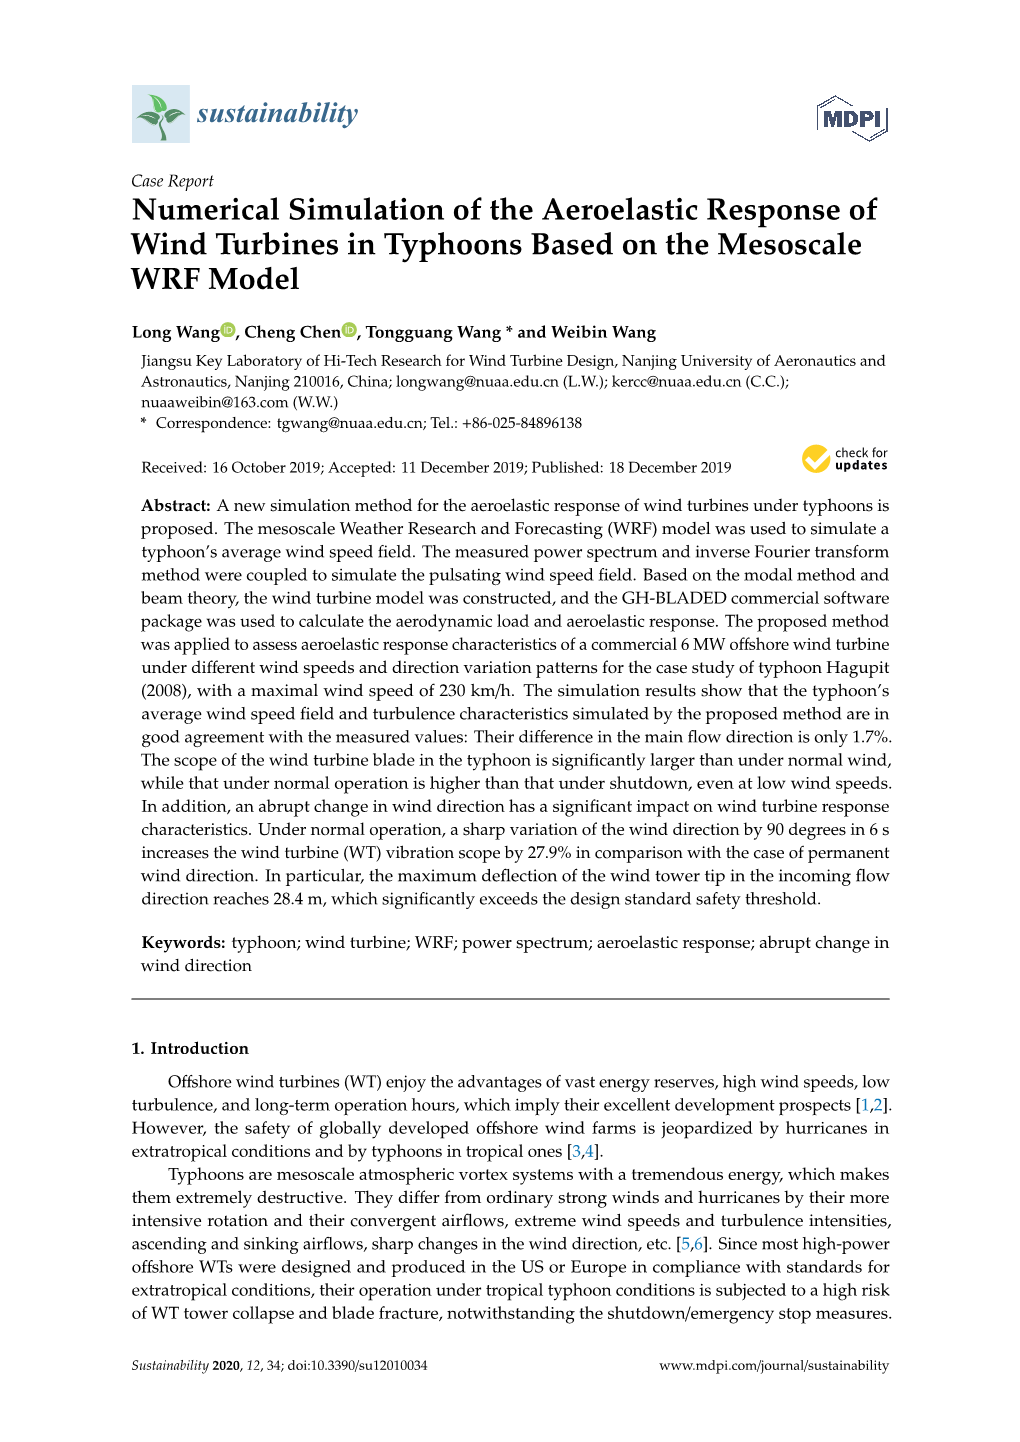 Numerical Simulation of the Aeroelastic Response of Wind Turbines in Typhoons Based on the Mesoscale WRF Model